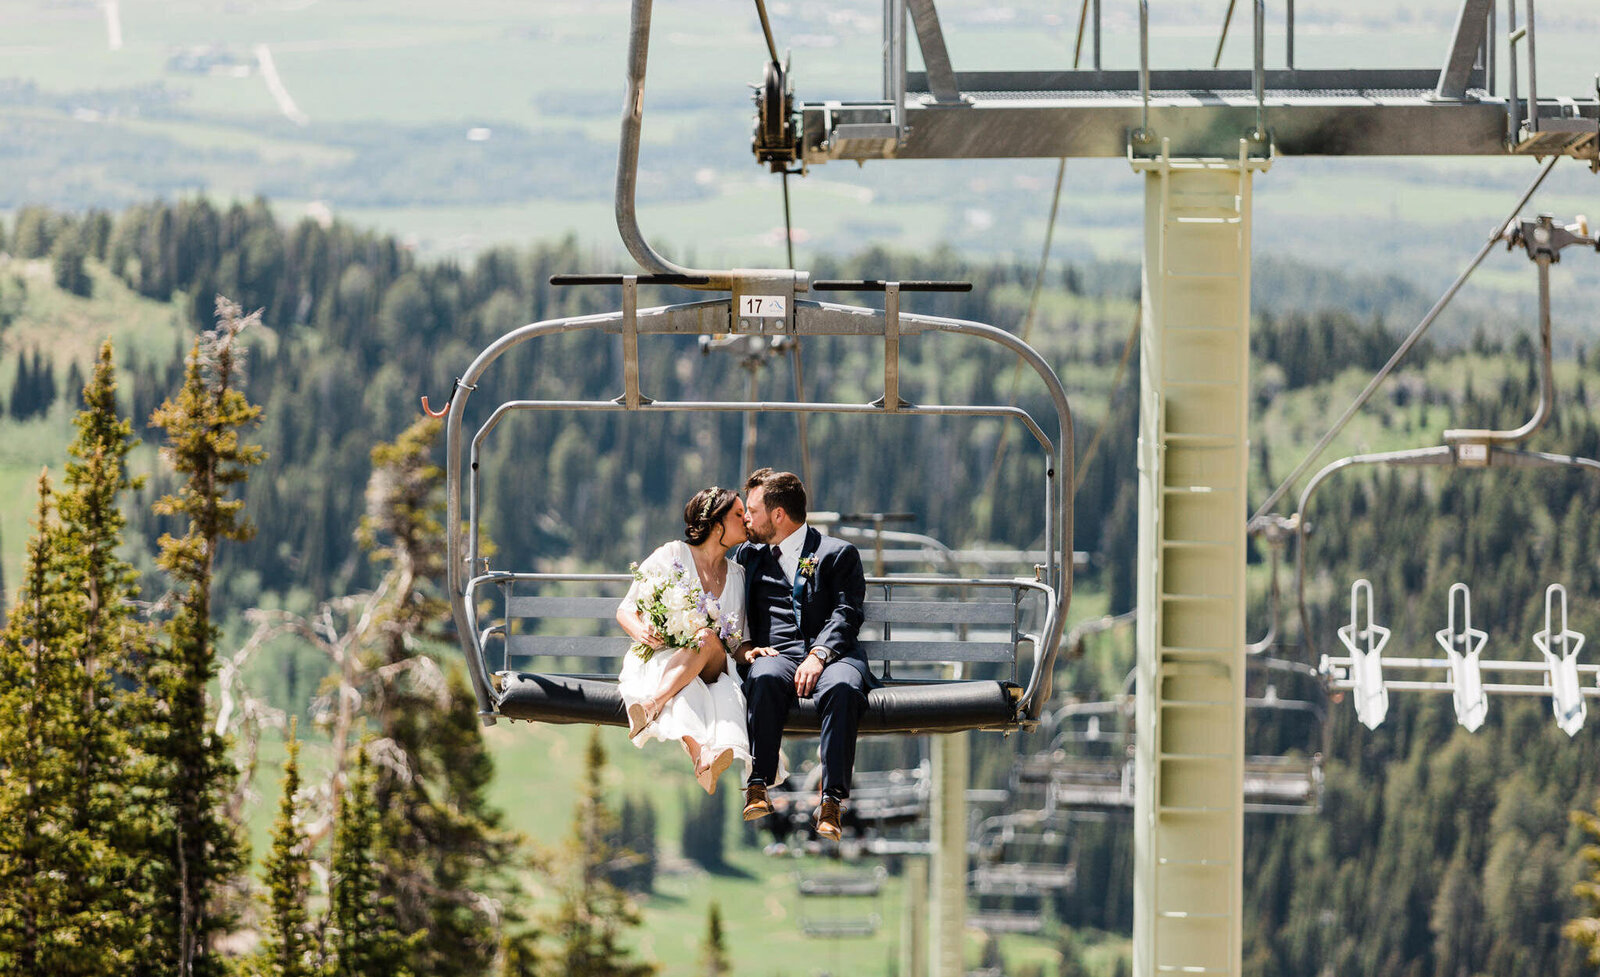 A couple rides a charilift after their mountaintop elopement at Grand Targhee photographed by Washington elopement photographer Amy Galbraith